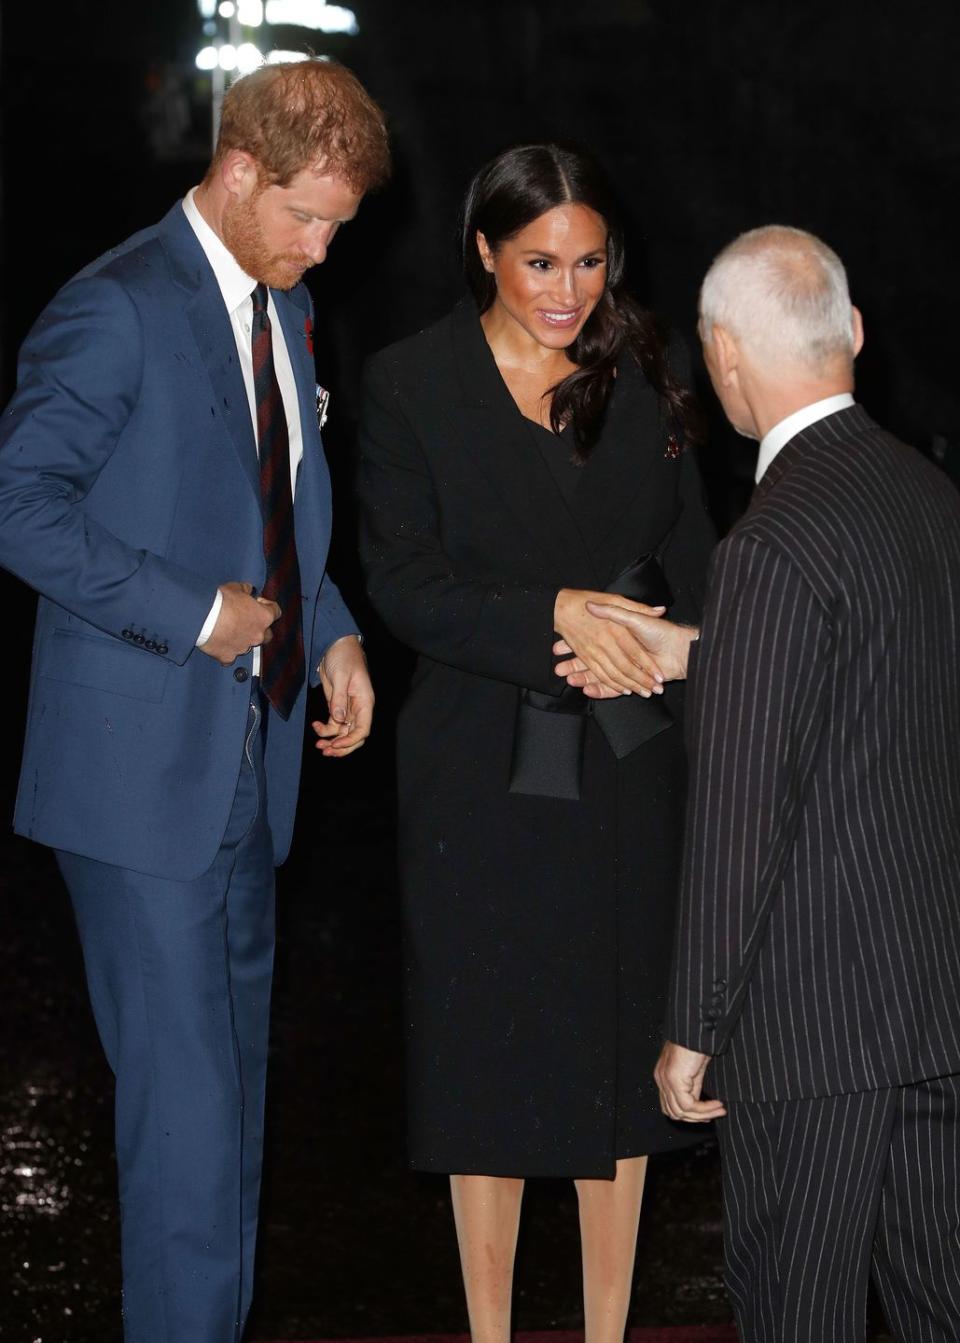 <p>The Sussexes are at the Royal Albert Hall tonight as well. Here they are making introductions before the event begins.</p>